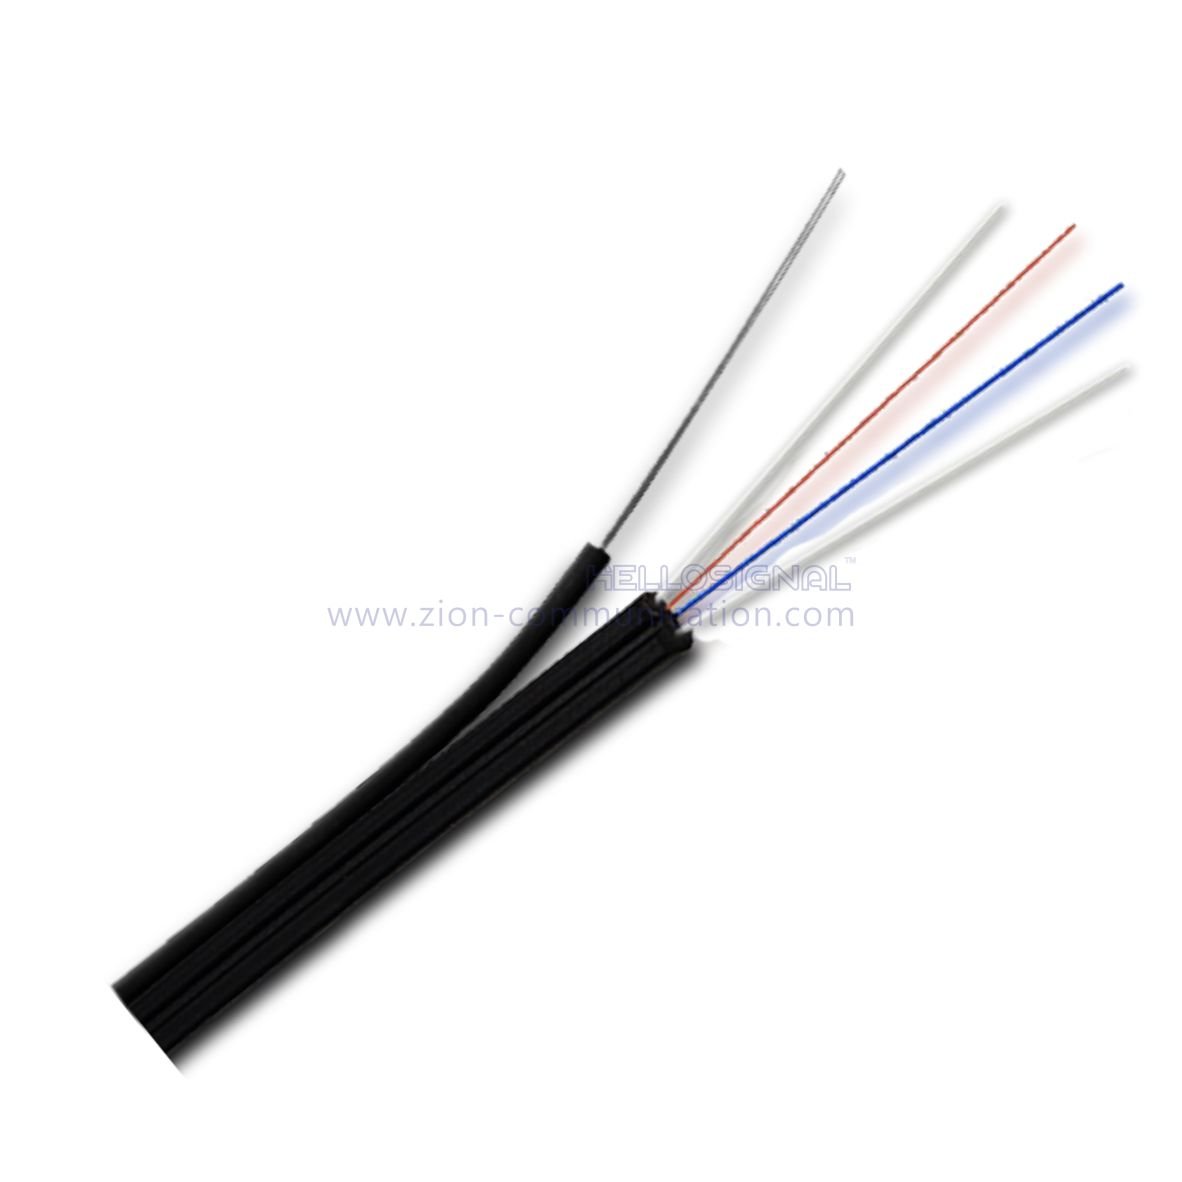 GJYXFCH-4 G657A1 Self-Supporting GFRP Drop cable